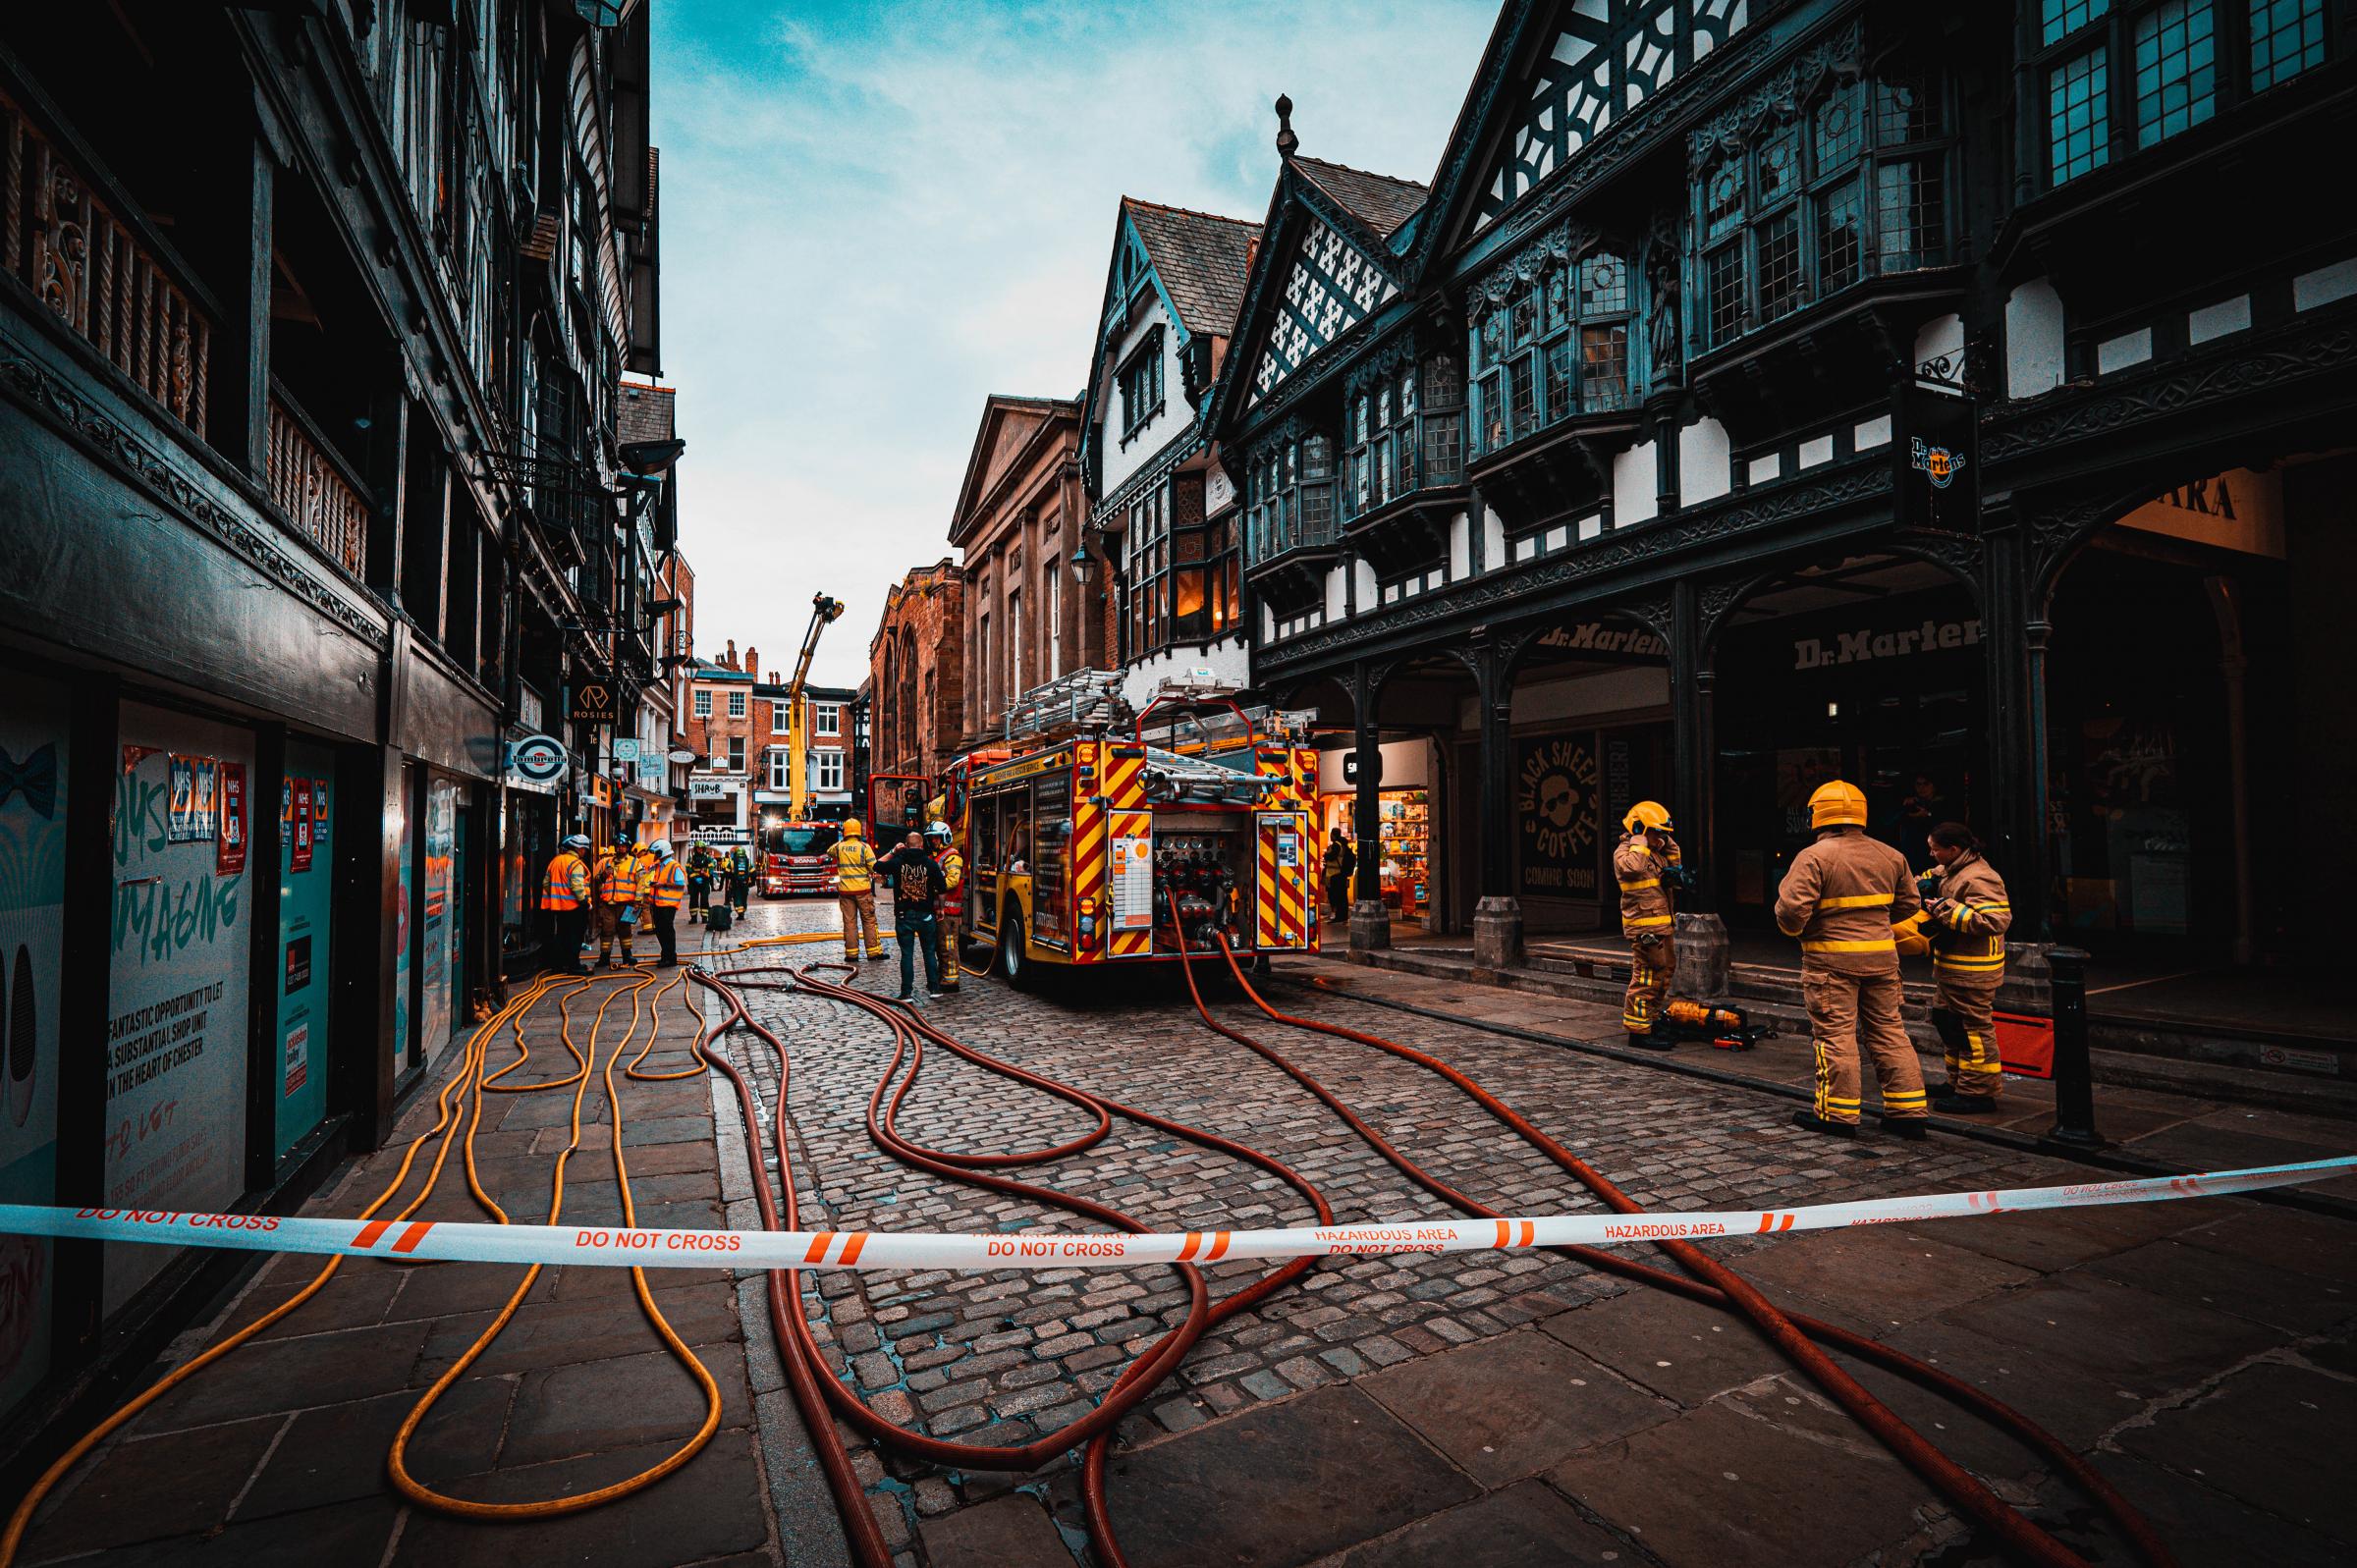 The emergency exercise at Rosies nightclub, Northgate Street, Chester. Picture: CFRS.